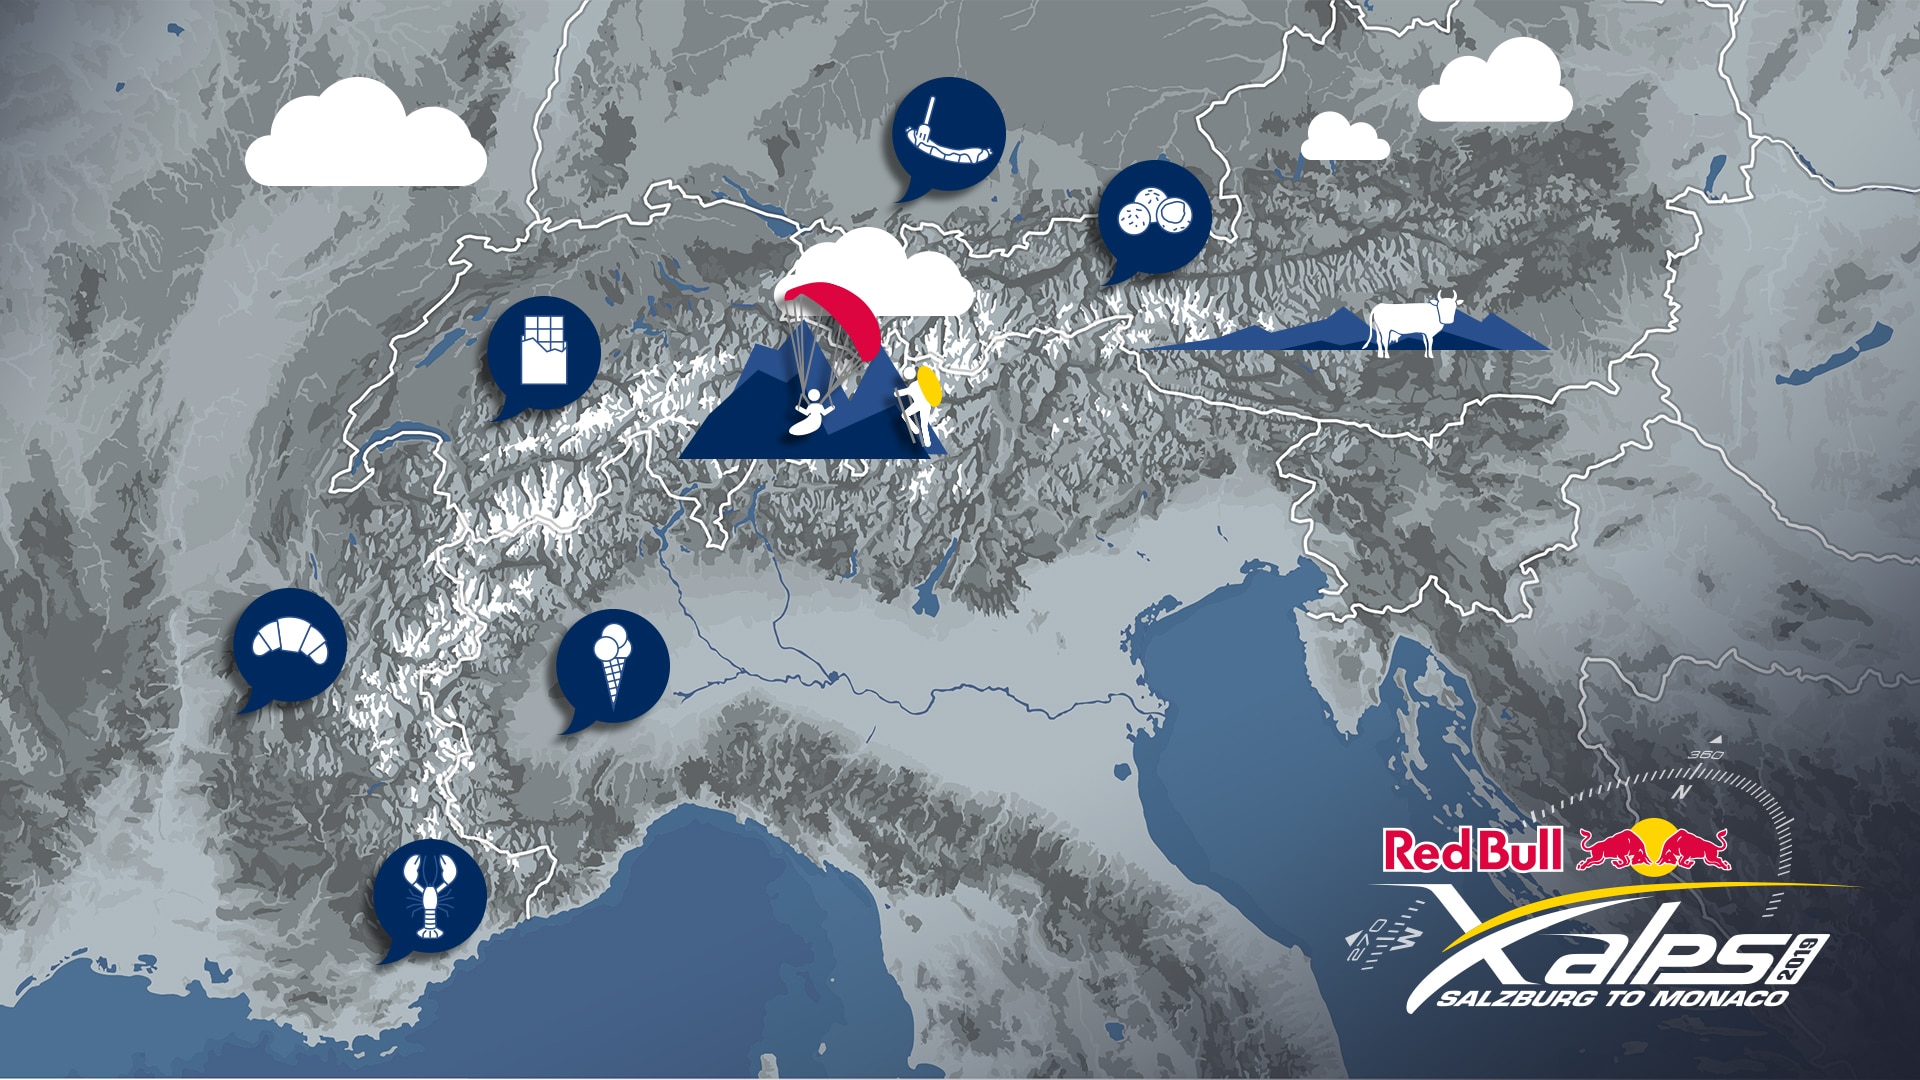 red bull xalps 2019 map countries